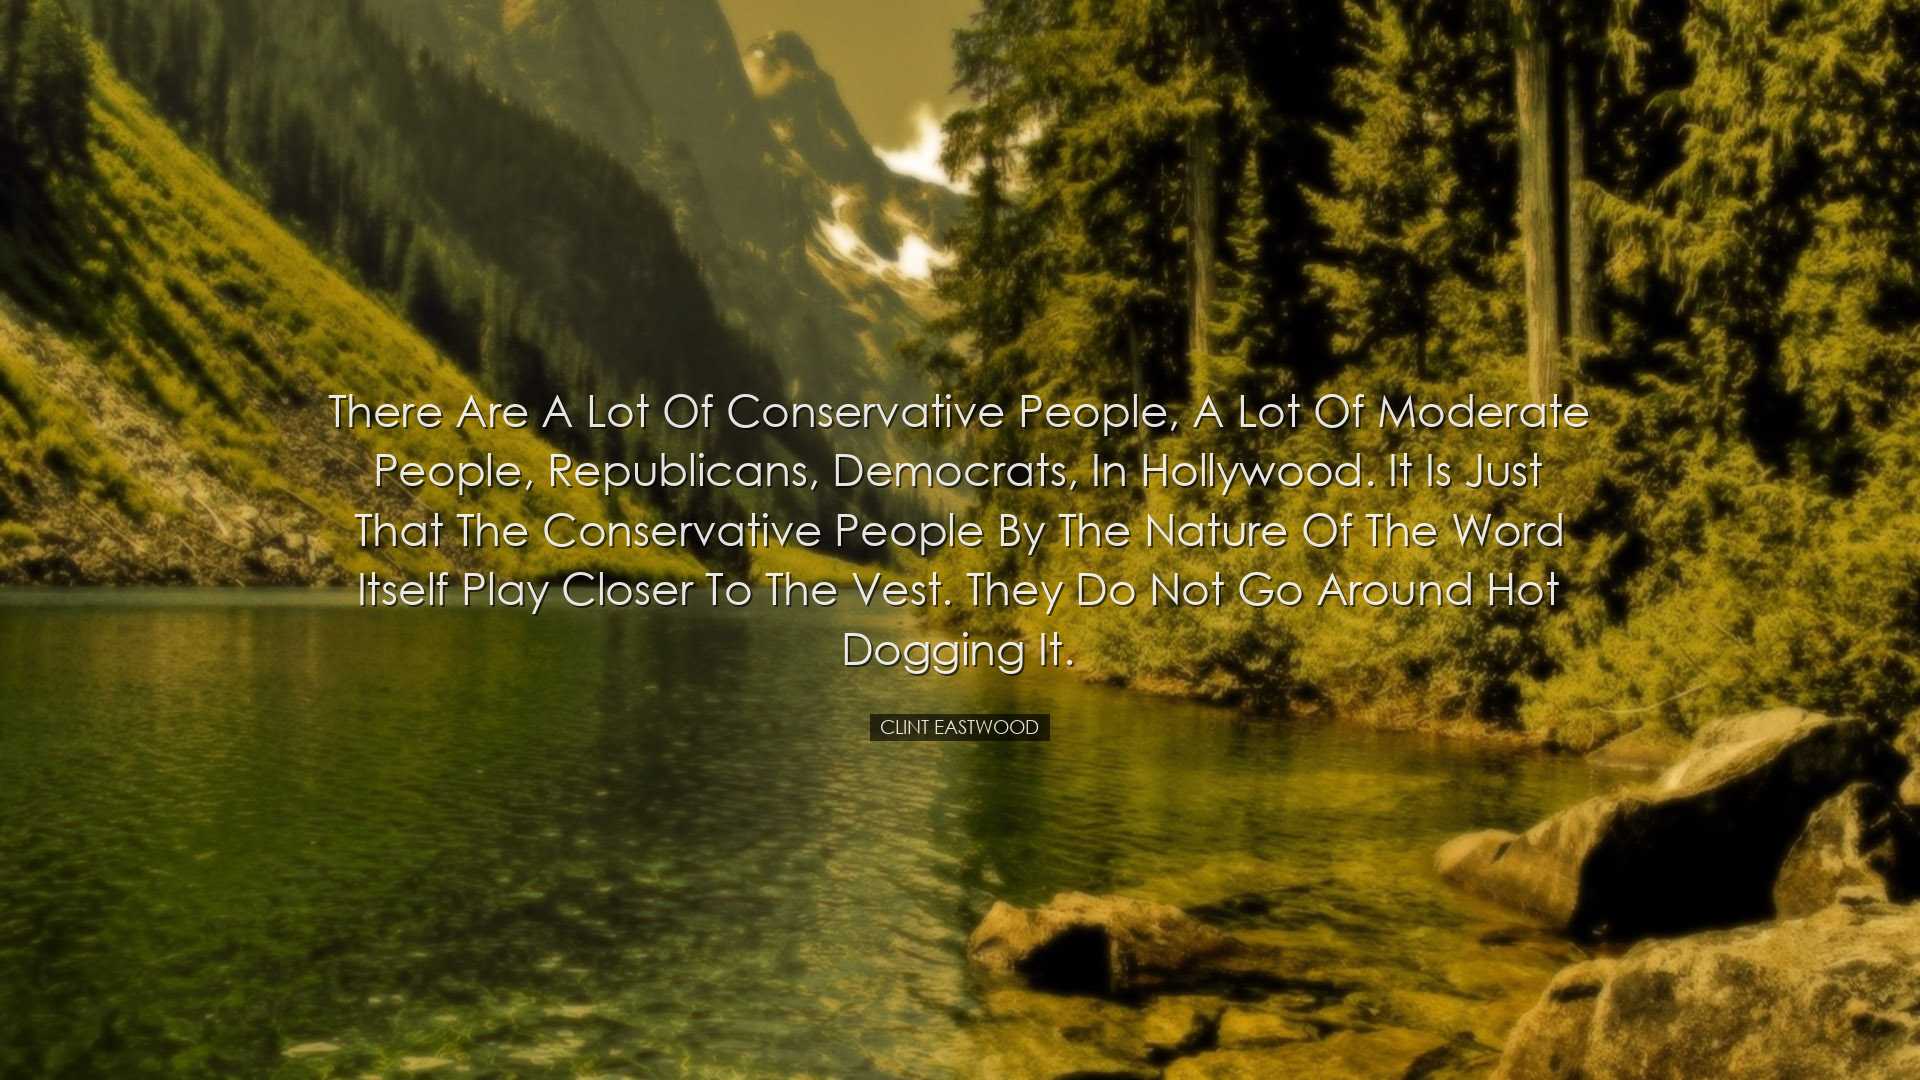 There are a lot of conservative people, a lot of moderate people,